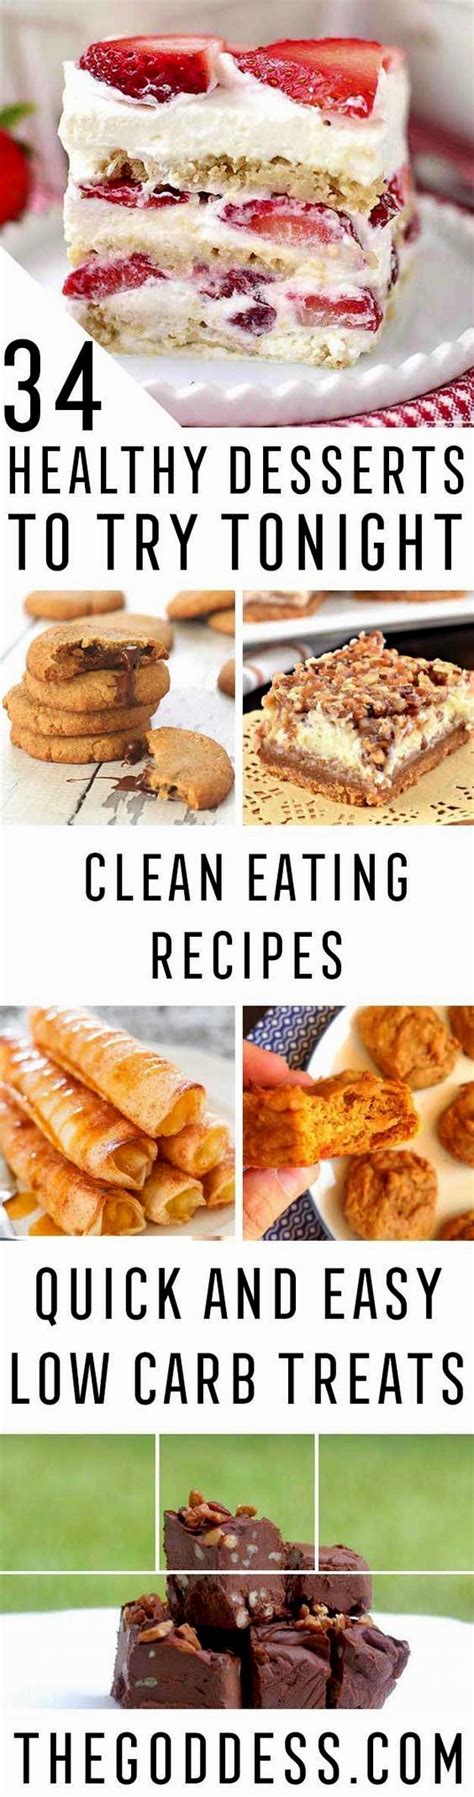 We've got the recipe for the chocolate glaze, too. Healthy Desserts To Try Tonight - Easy And Yummy DIY Health Desserts Under 100 Calories To Try T ...